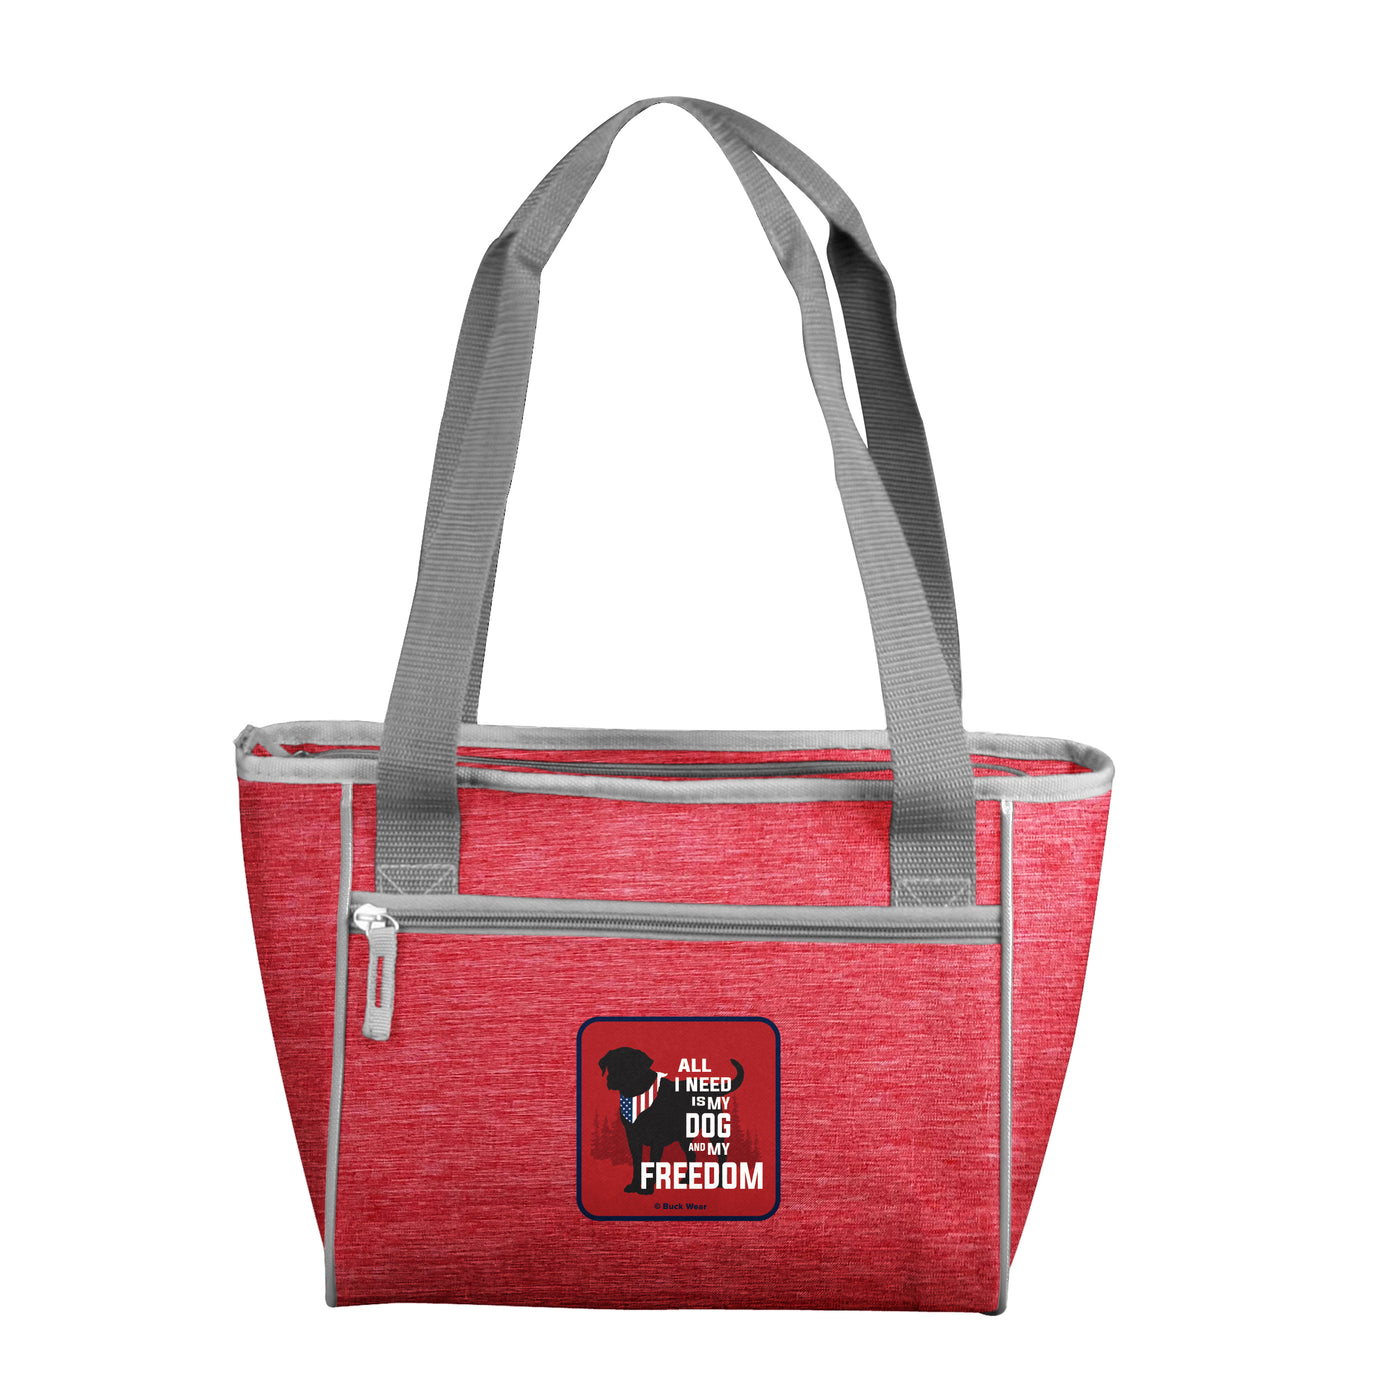 Freedom Dog 16 Can Cooler Tote